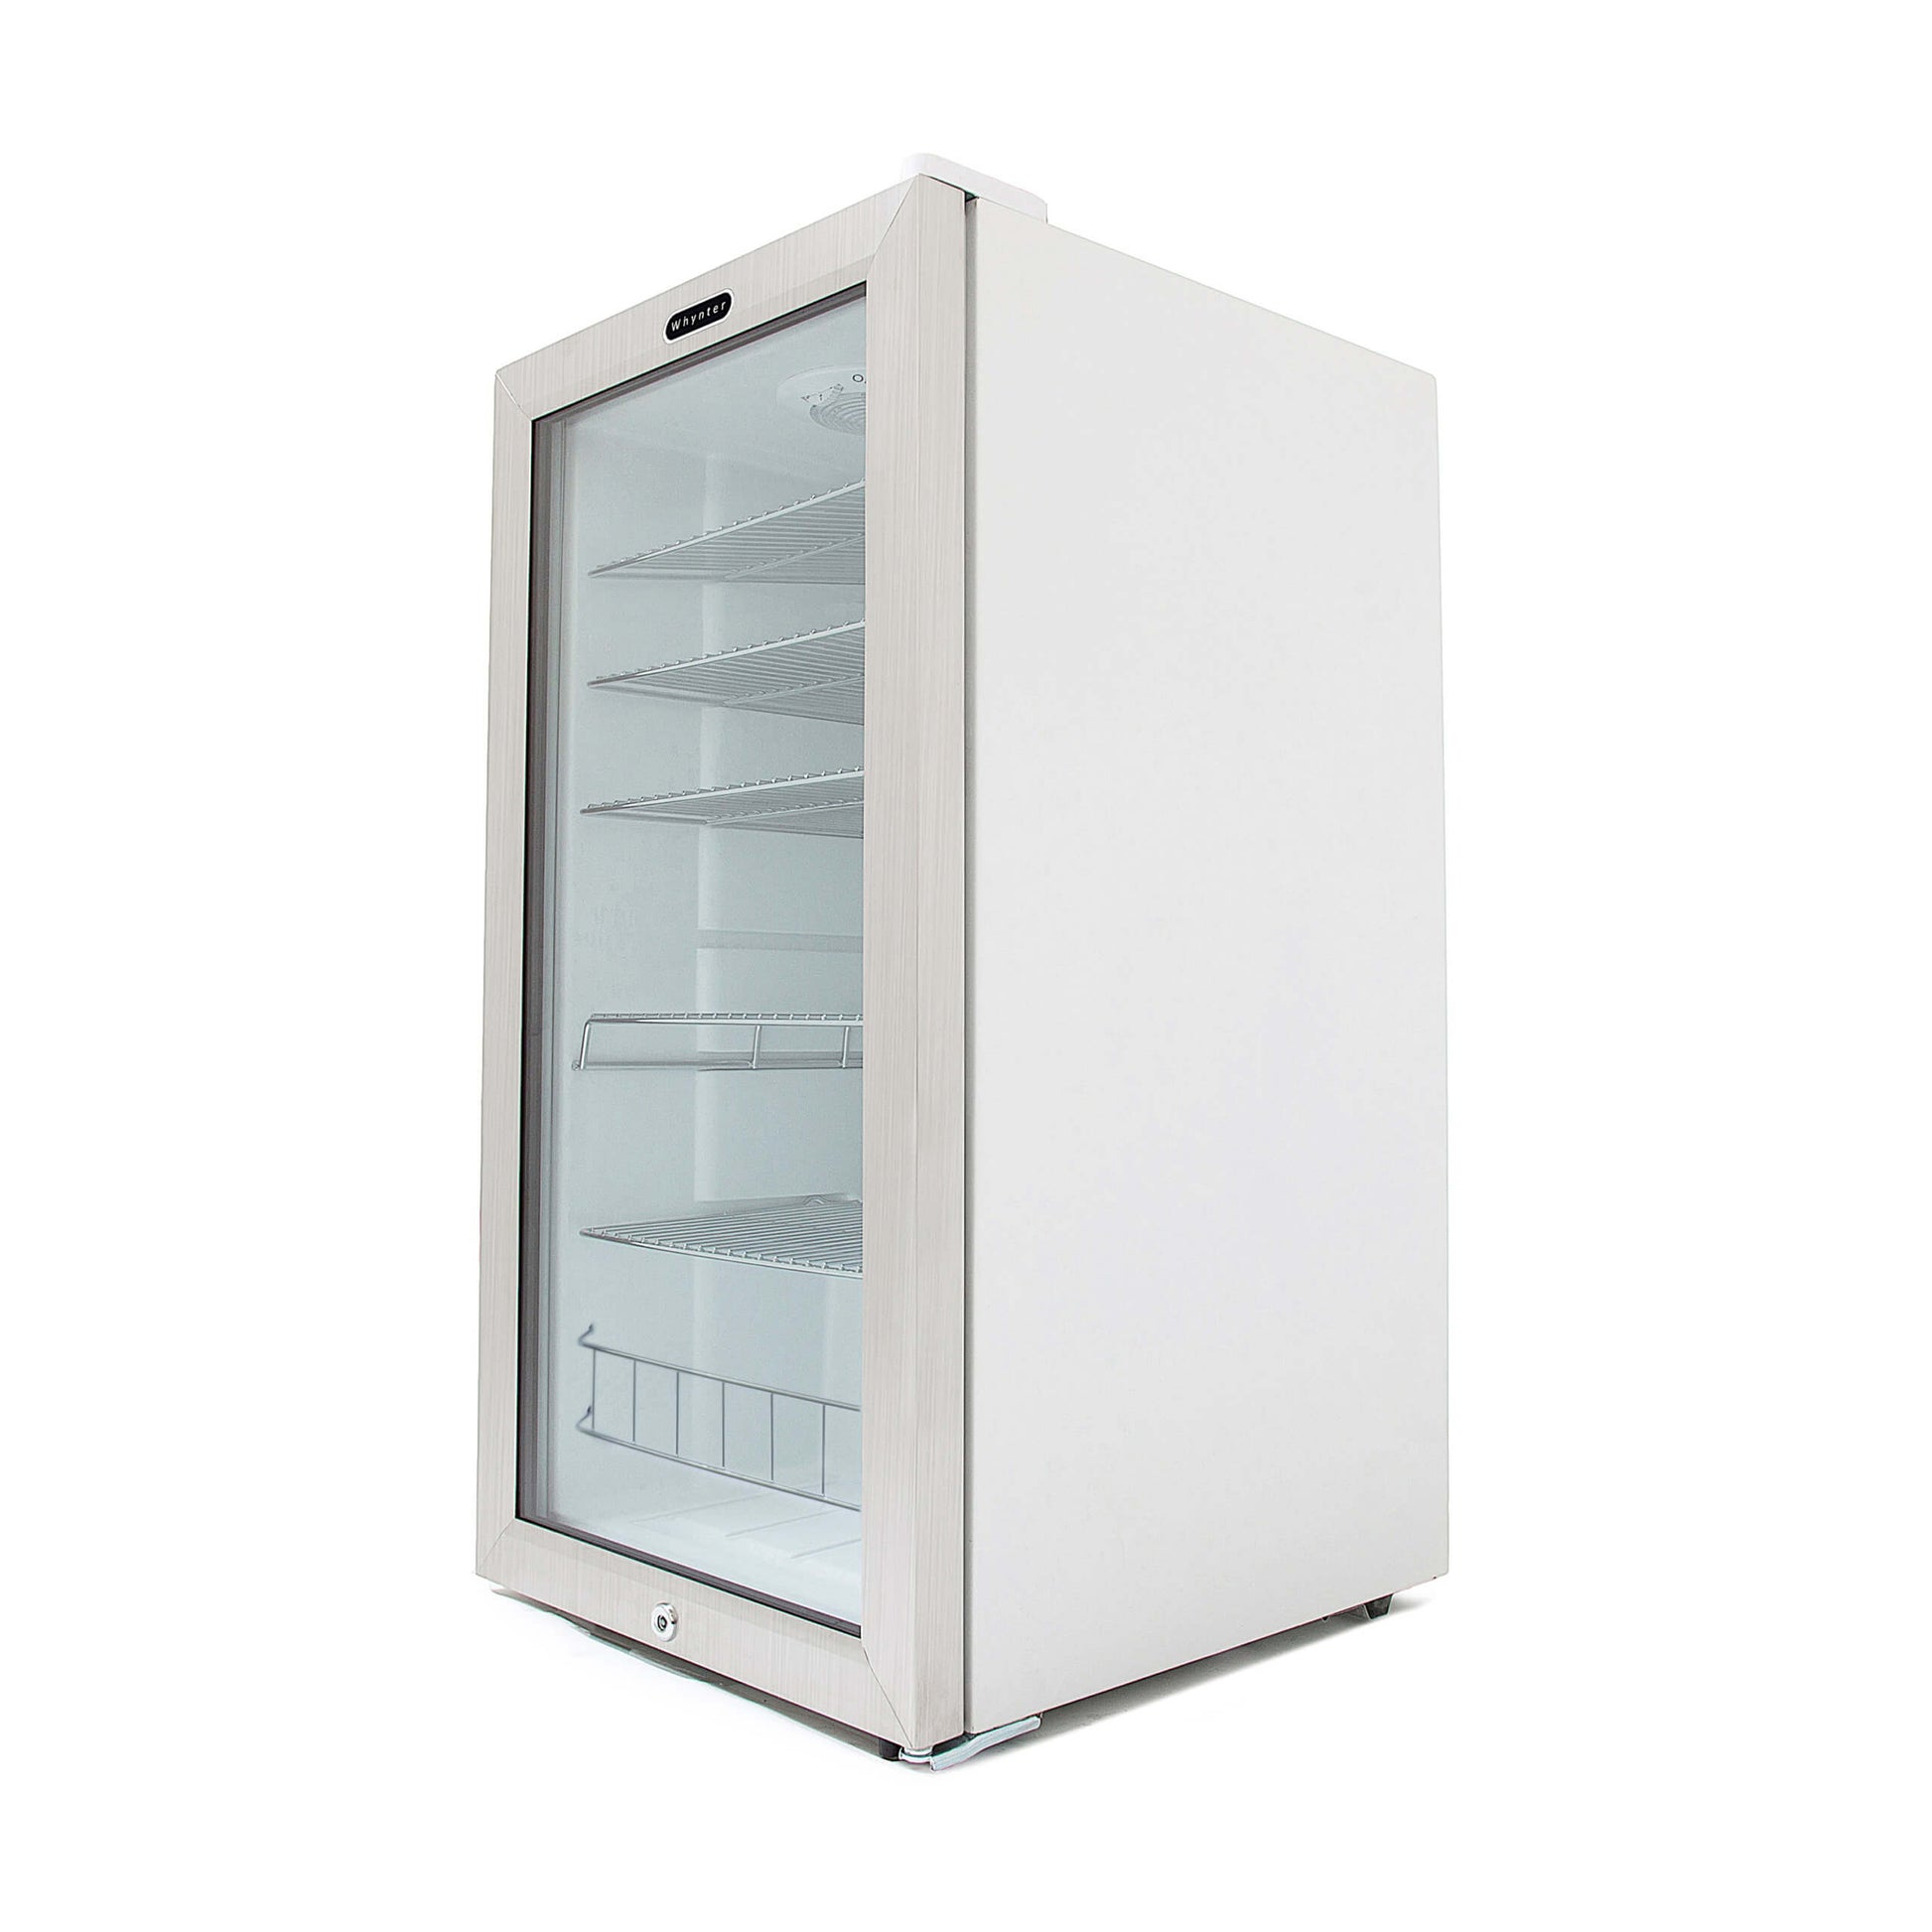 Whynter Refrigerators Whynter BR-128WS Beverage Refrigerator With Lock – Stainless Steel 120 Can Capacity